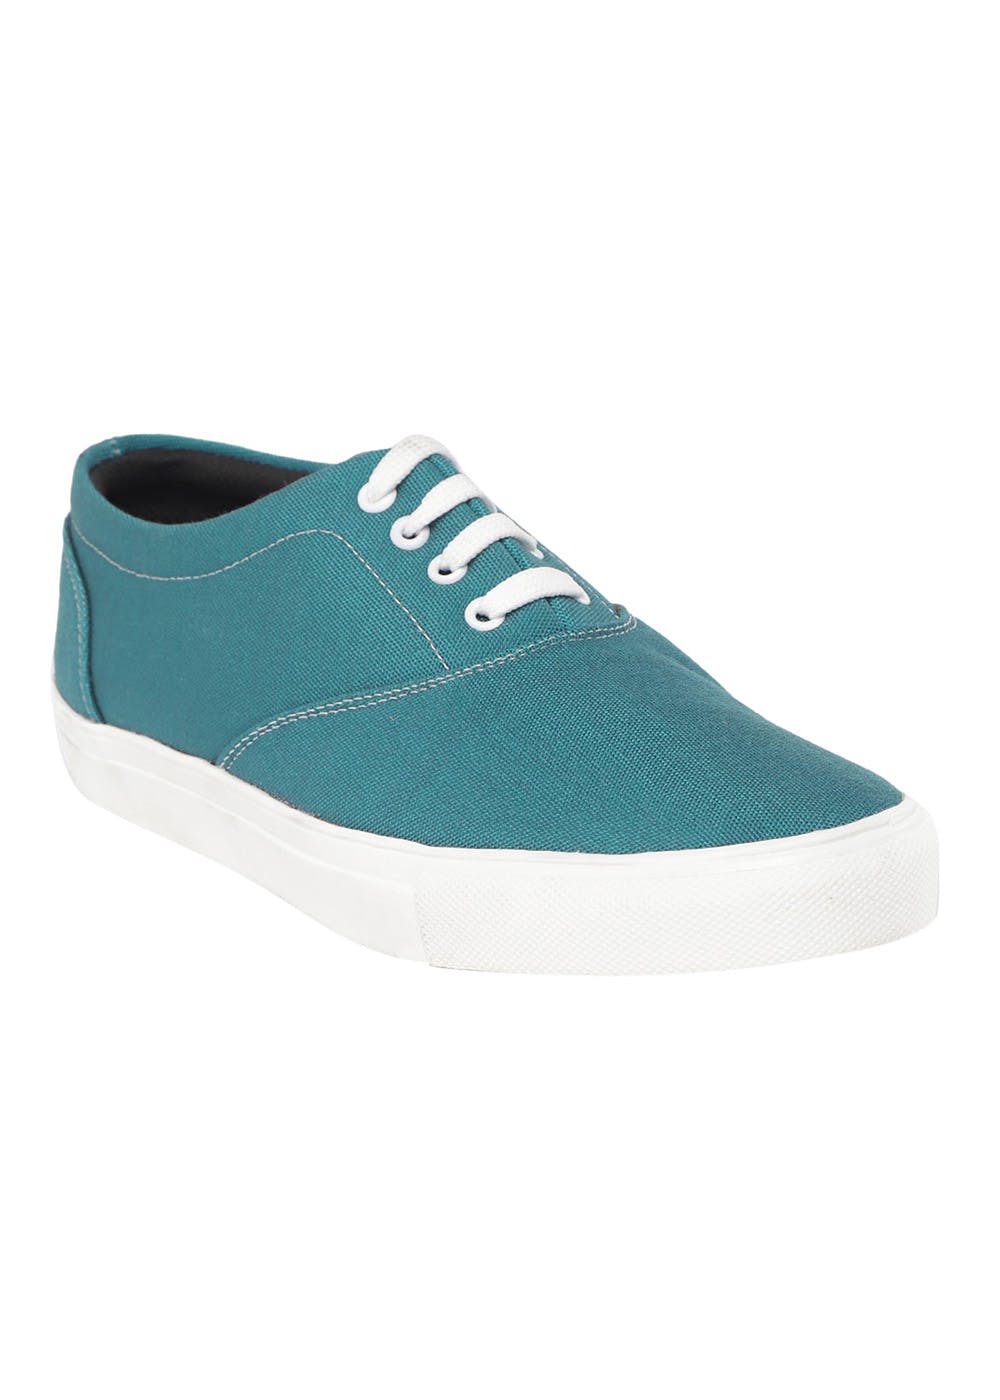 Get Classic Solid Sage Green Sneakers at ₹ 1199 | LBB Shop